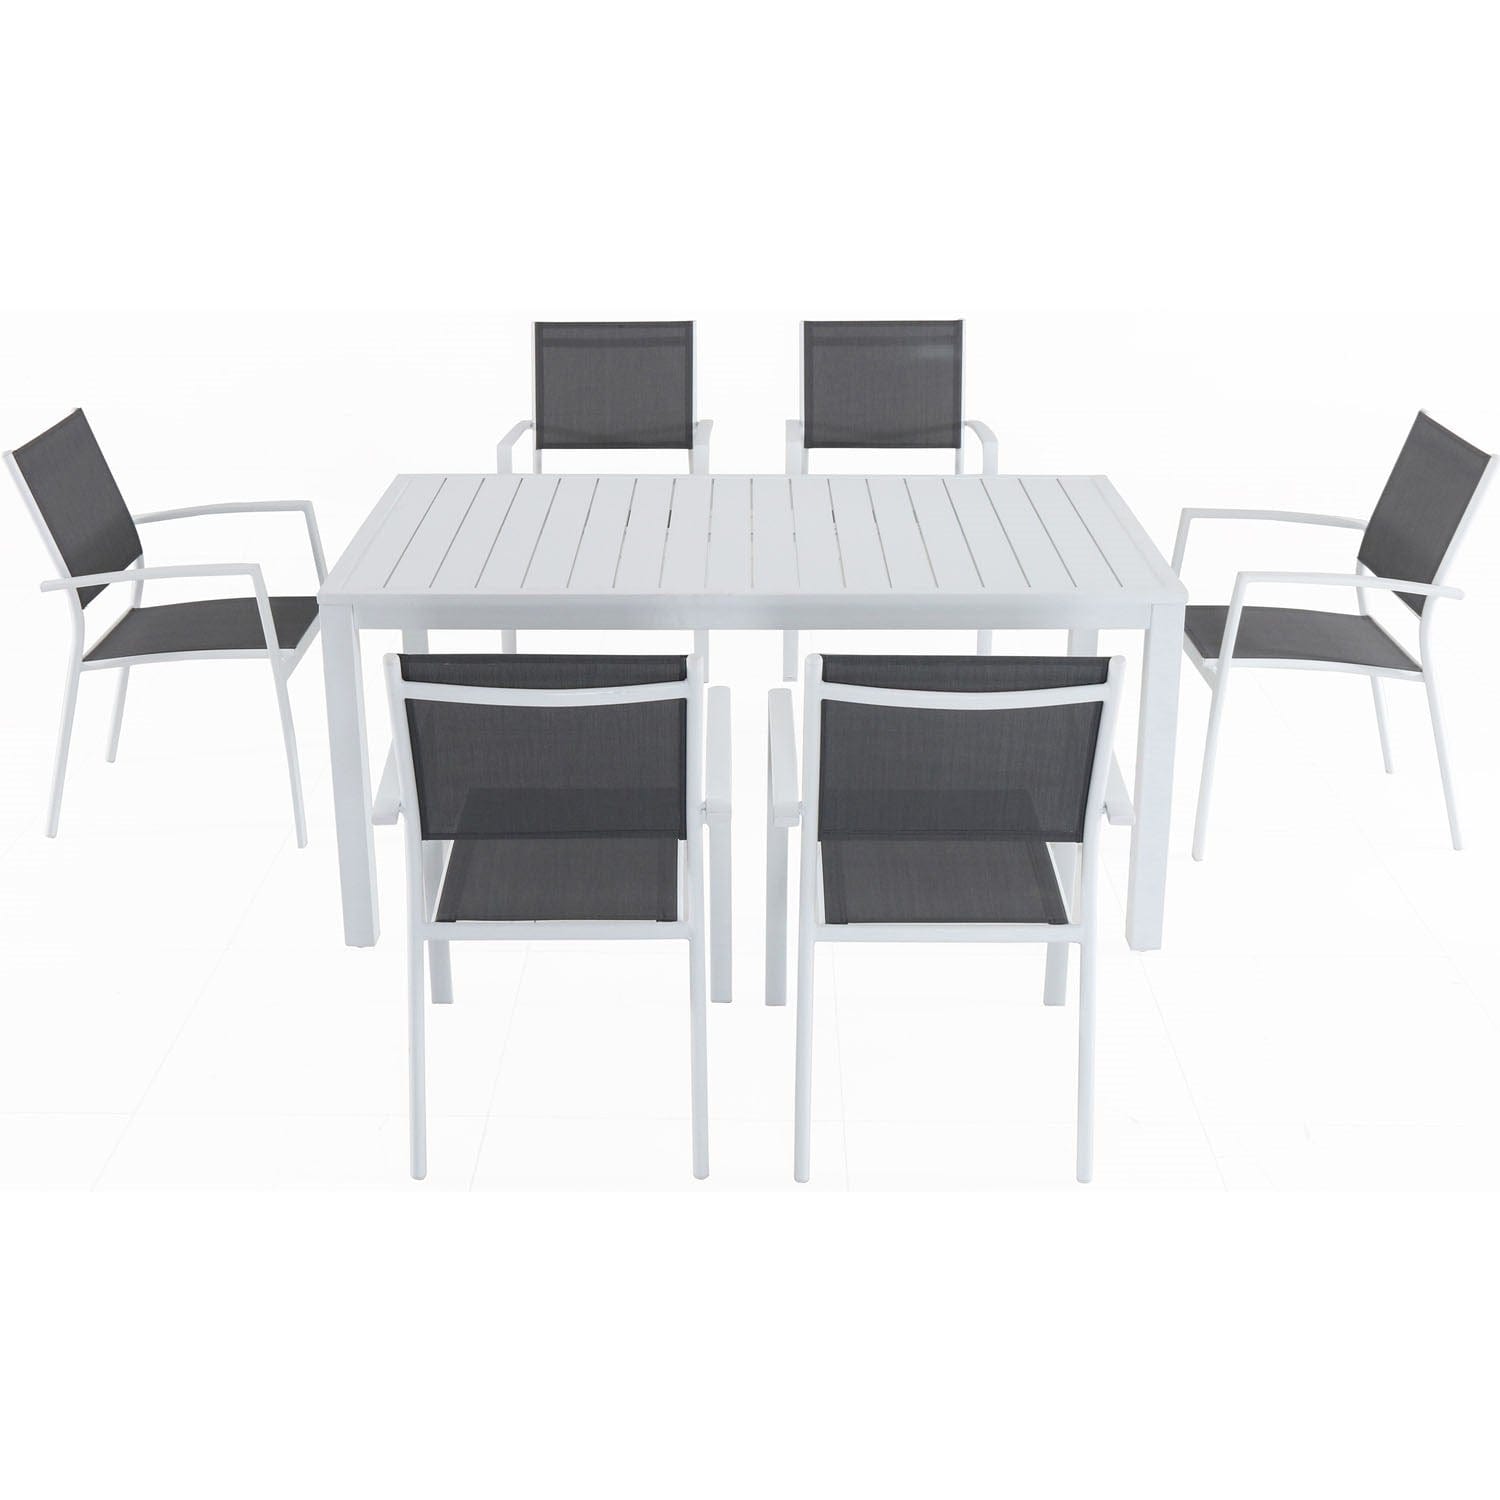 Hanover Outdoor Dining Set Hanover Del Mar 7 Piece Outdoor Dining Set with 6 Sling Chairs in Gray/White and a 63" x 35" Dining Table | DELDNS7PC-WW